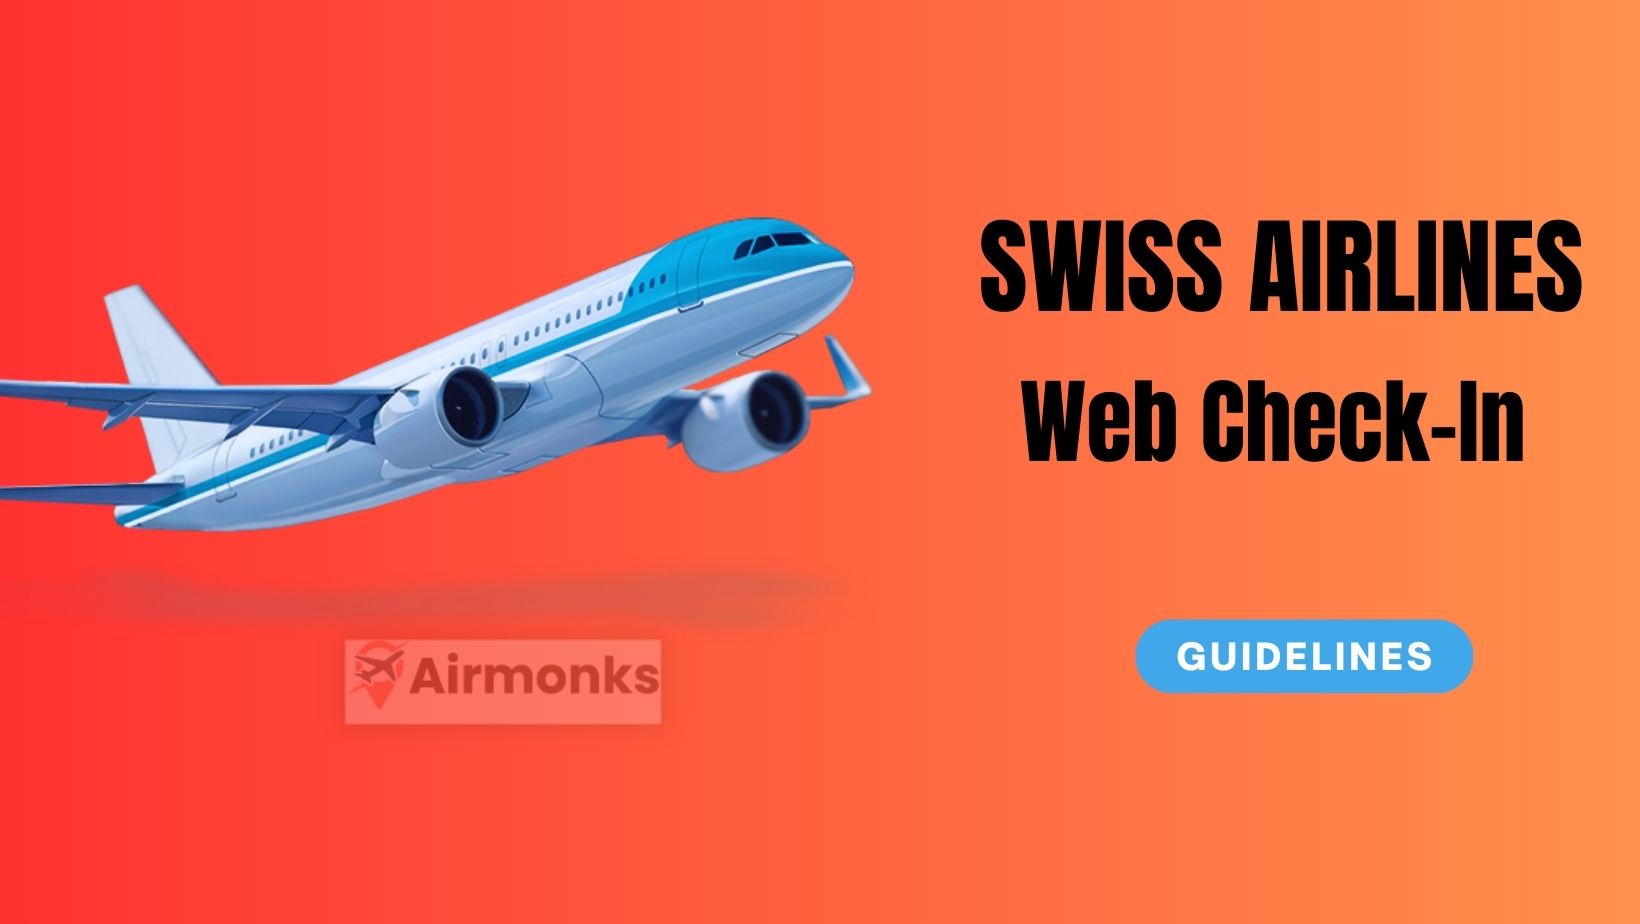 swiss airlines web check-in647844300d0e6.jpg